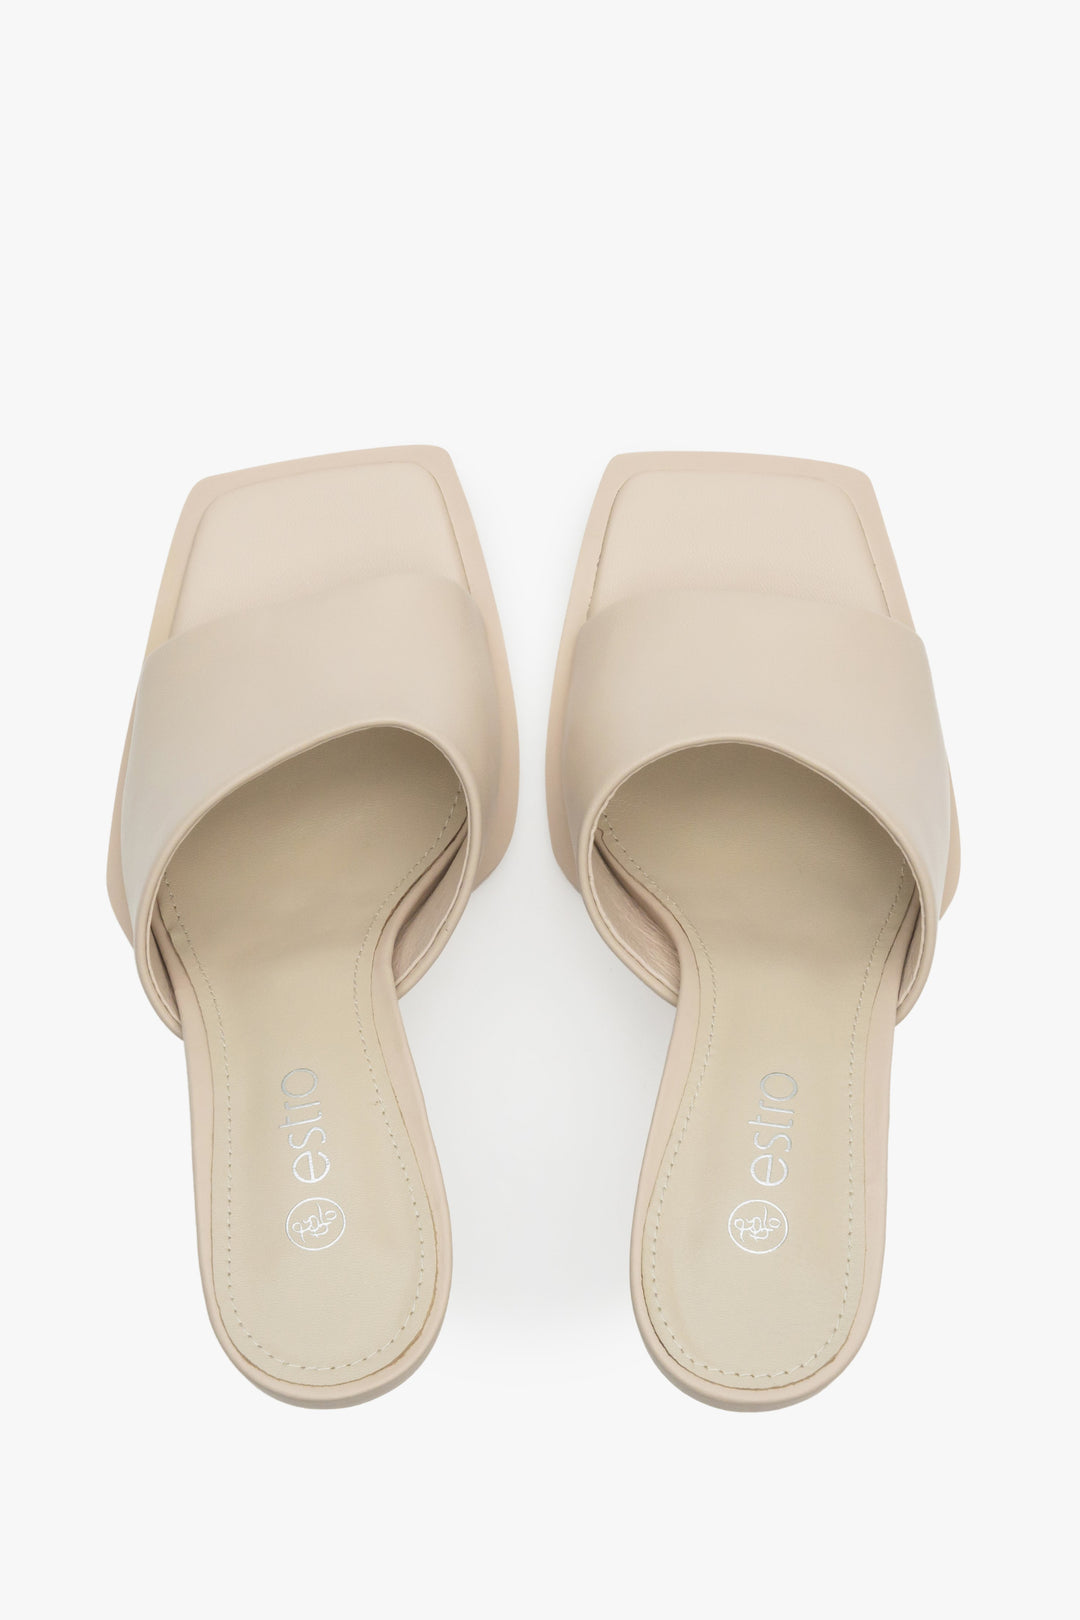 Natural leather women's light beige stiletto mules of Estro brand - presentation of the shoe from above.